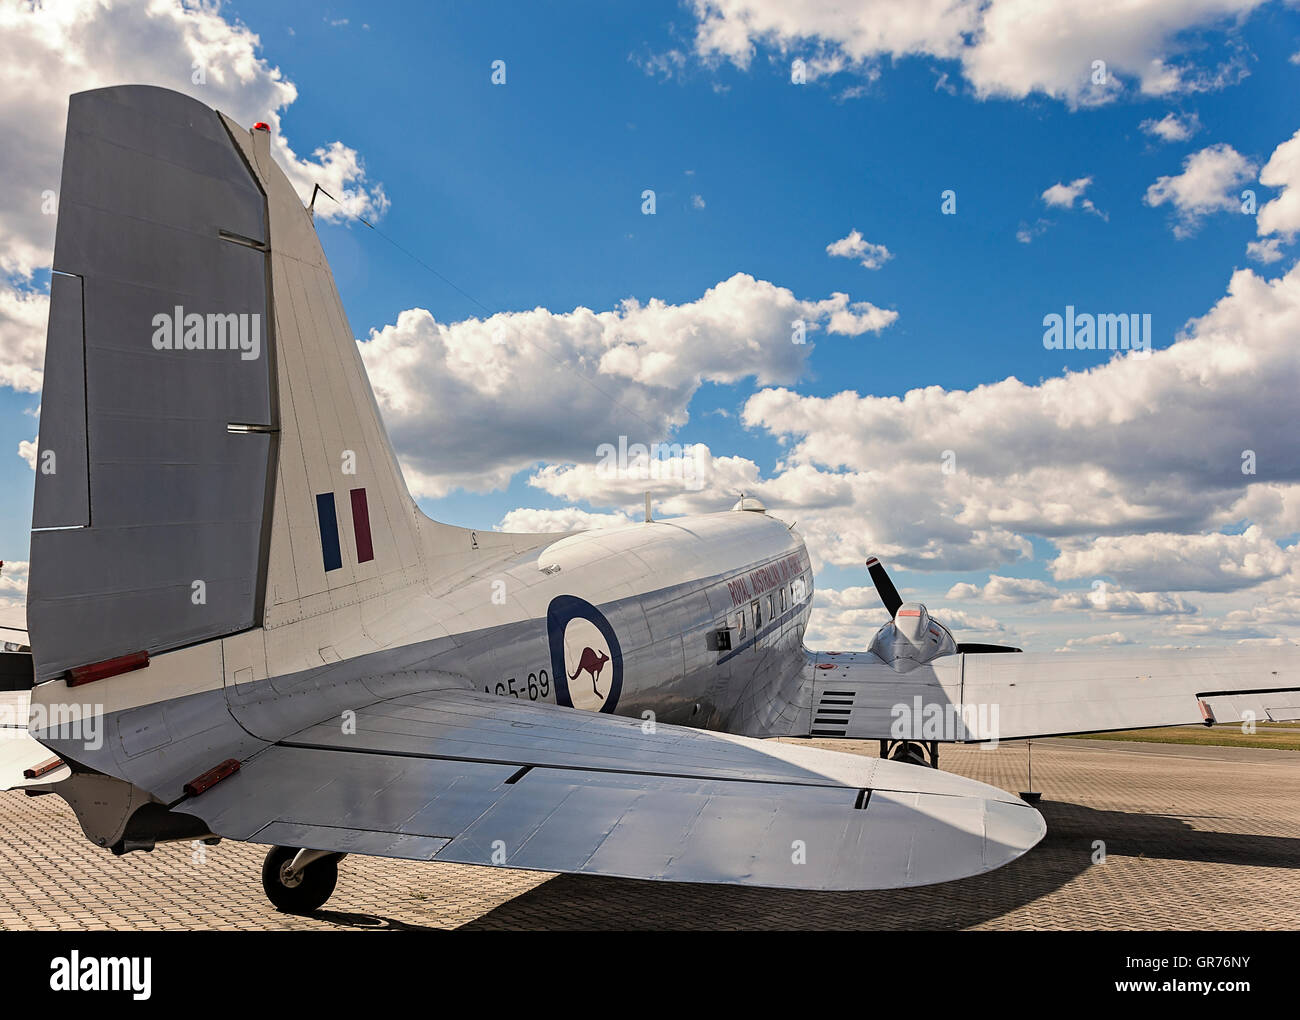 Royal Airlines Stock Photo